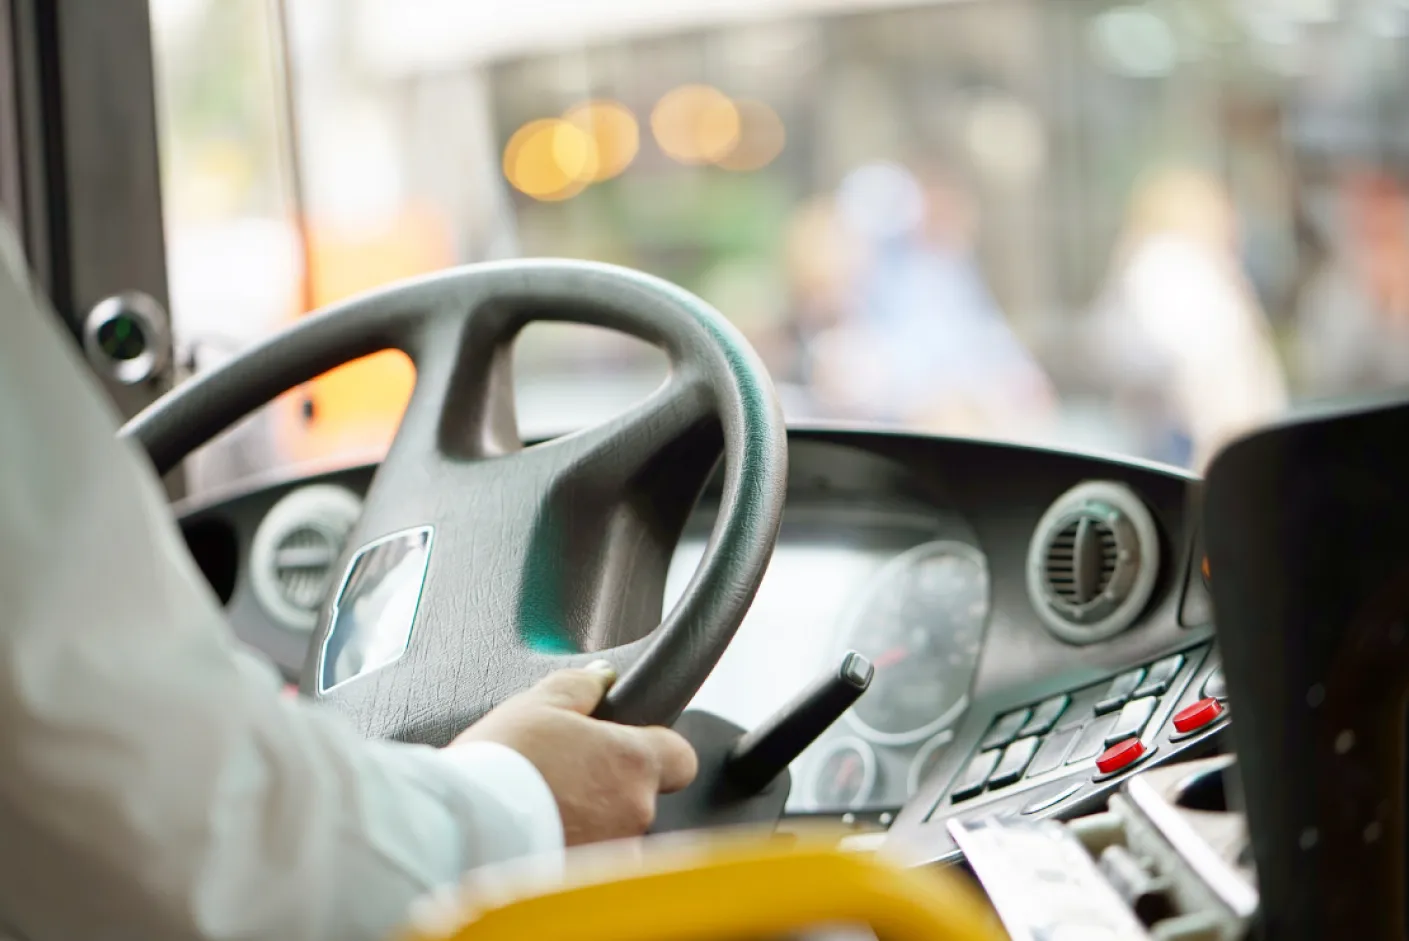 Here is what you need to know about the practice cdl permit test in USA